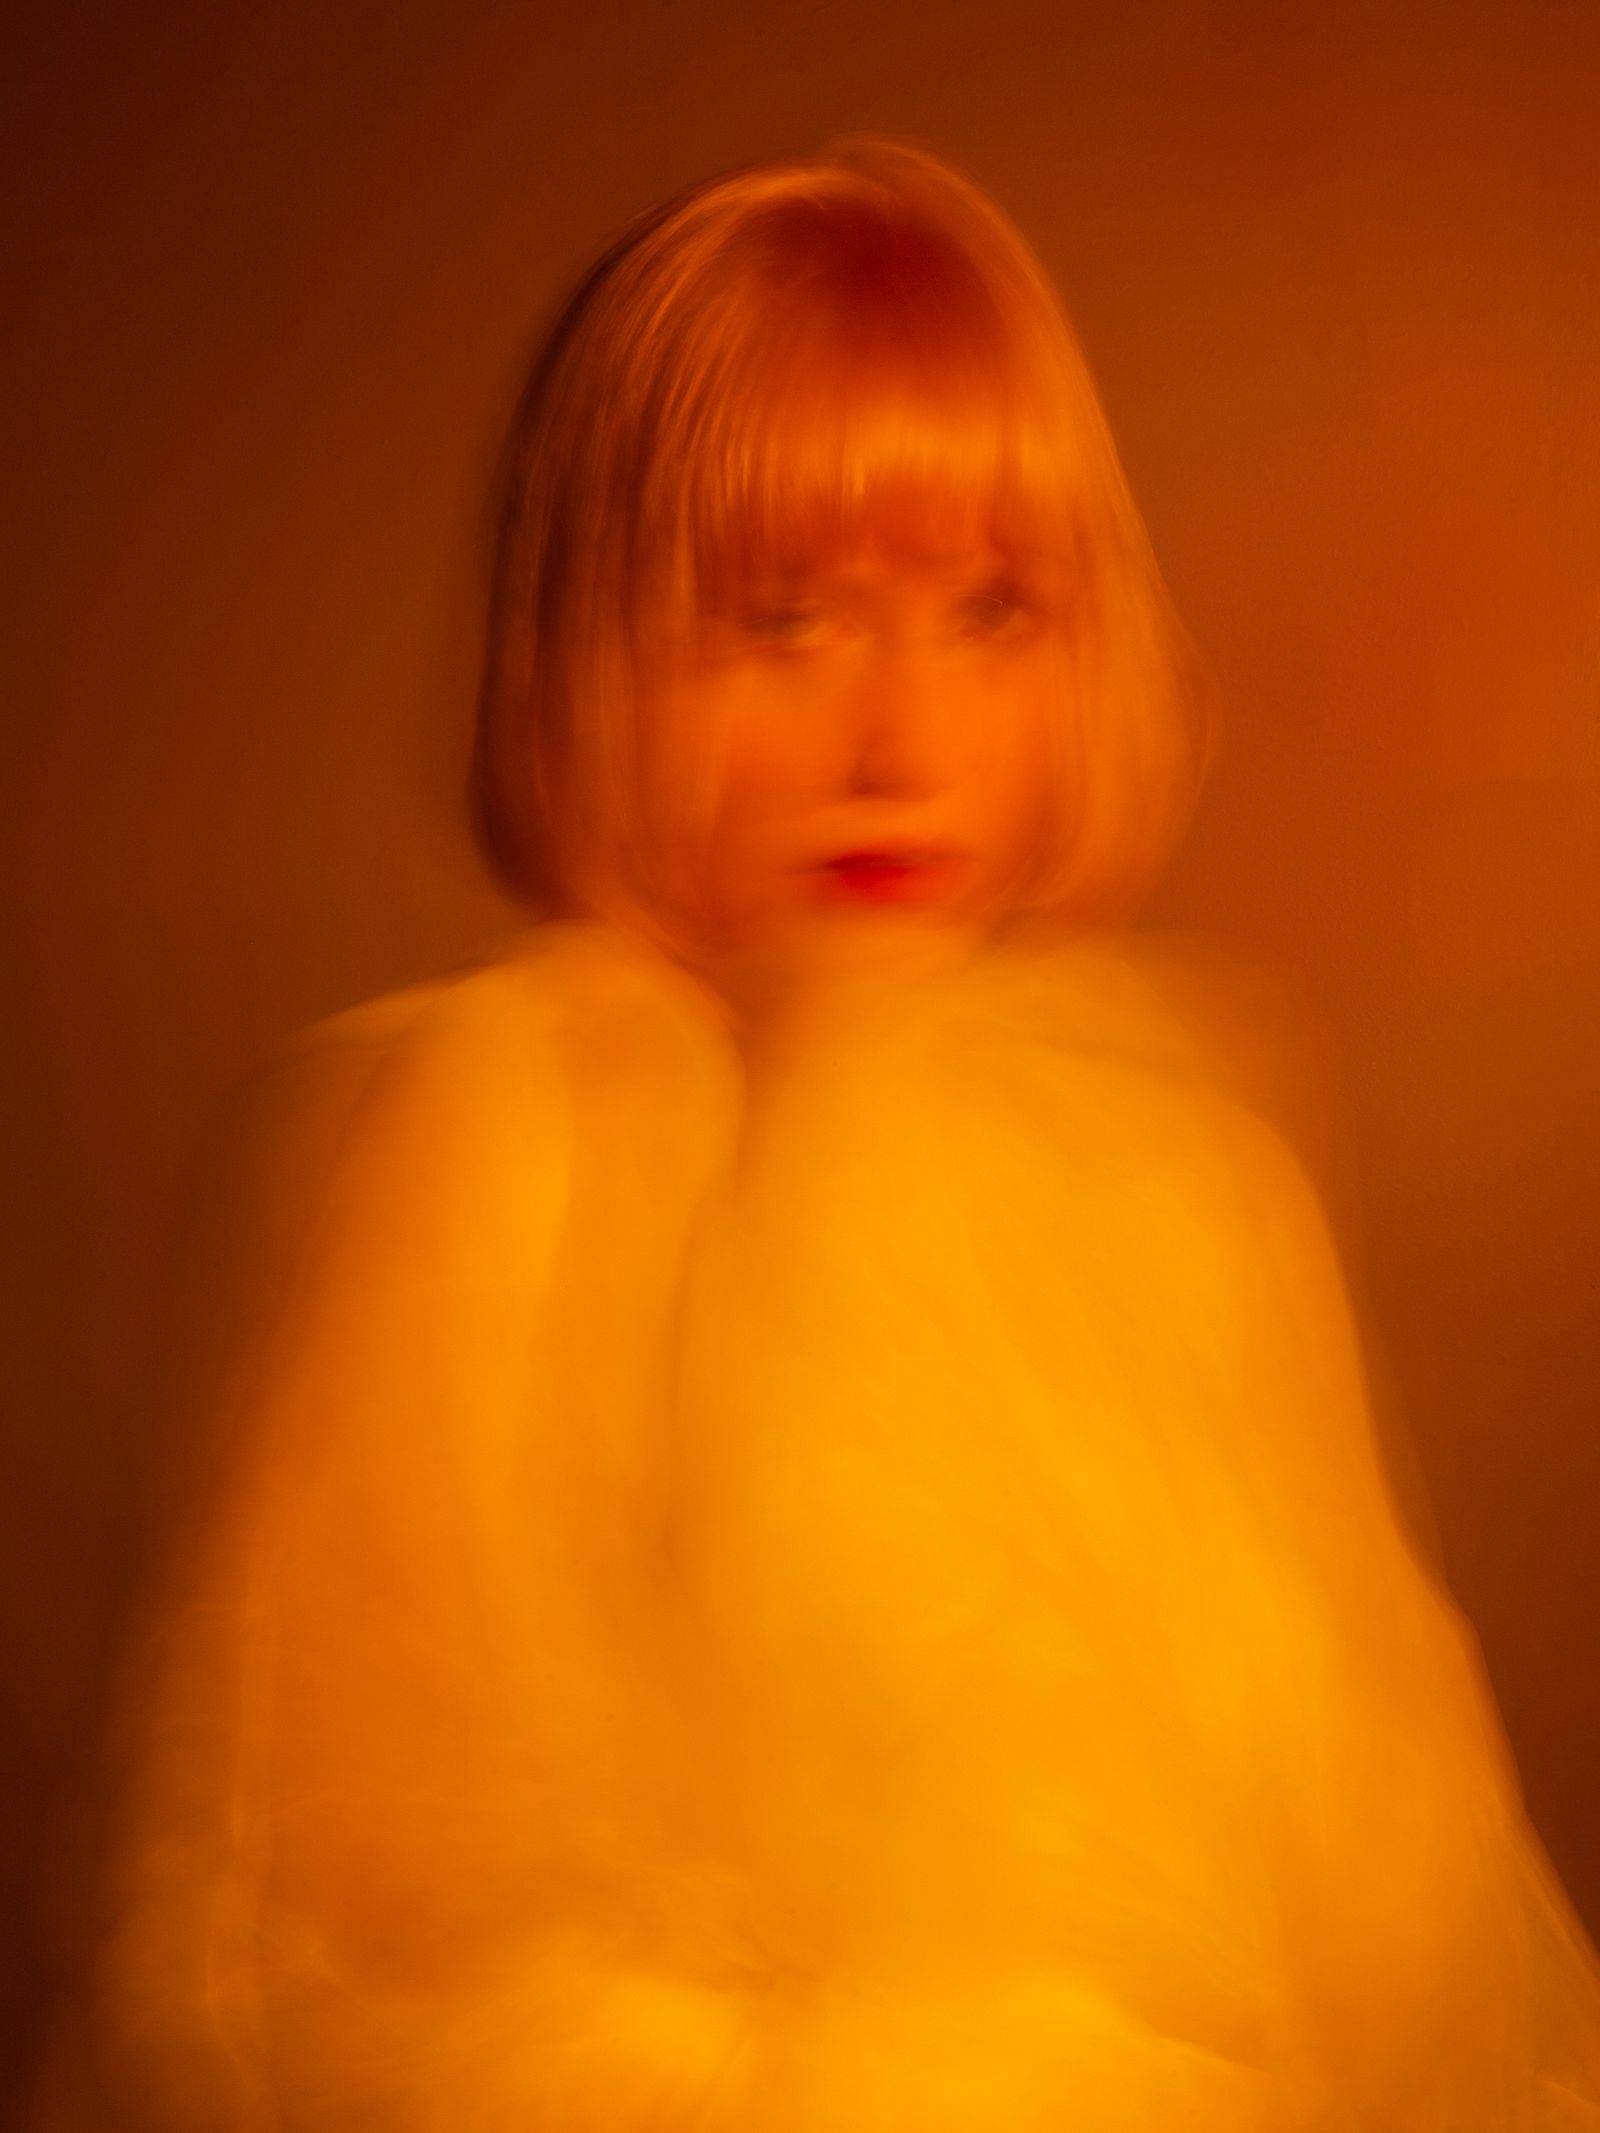 © Sari Soininen - Image from the Spinster photography project